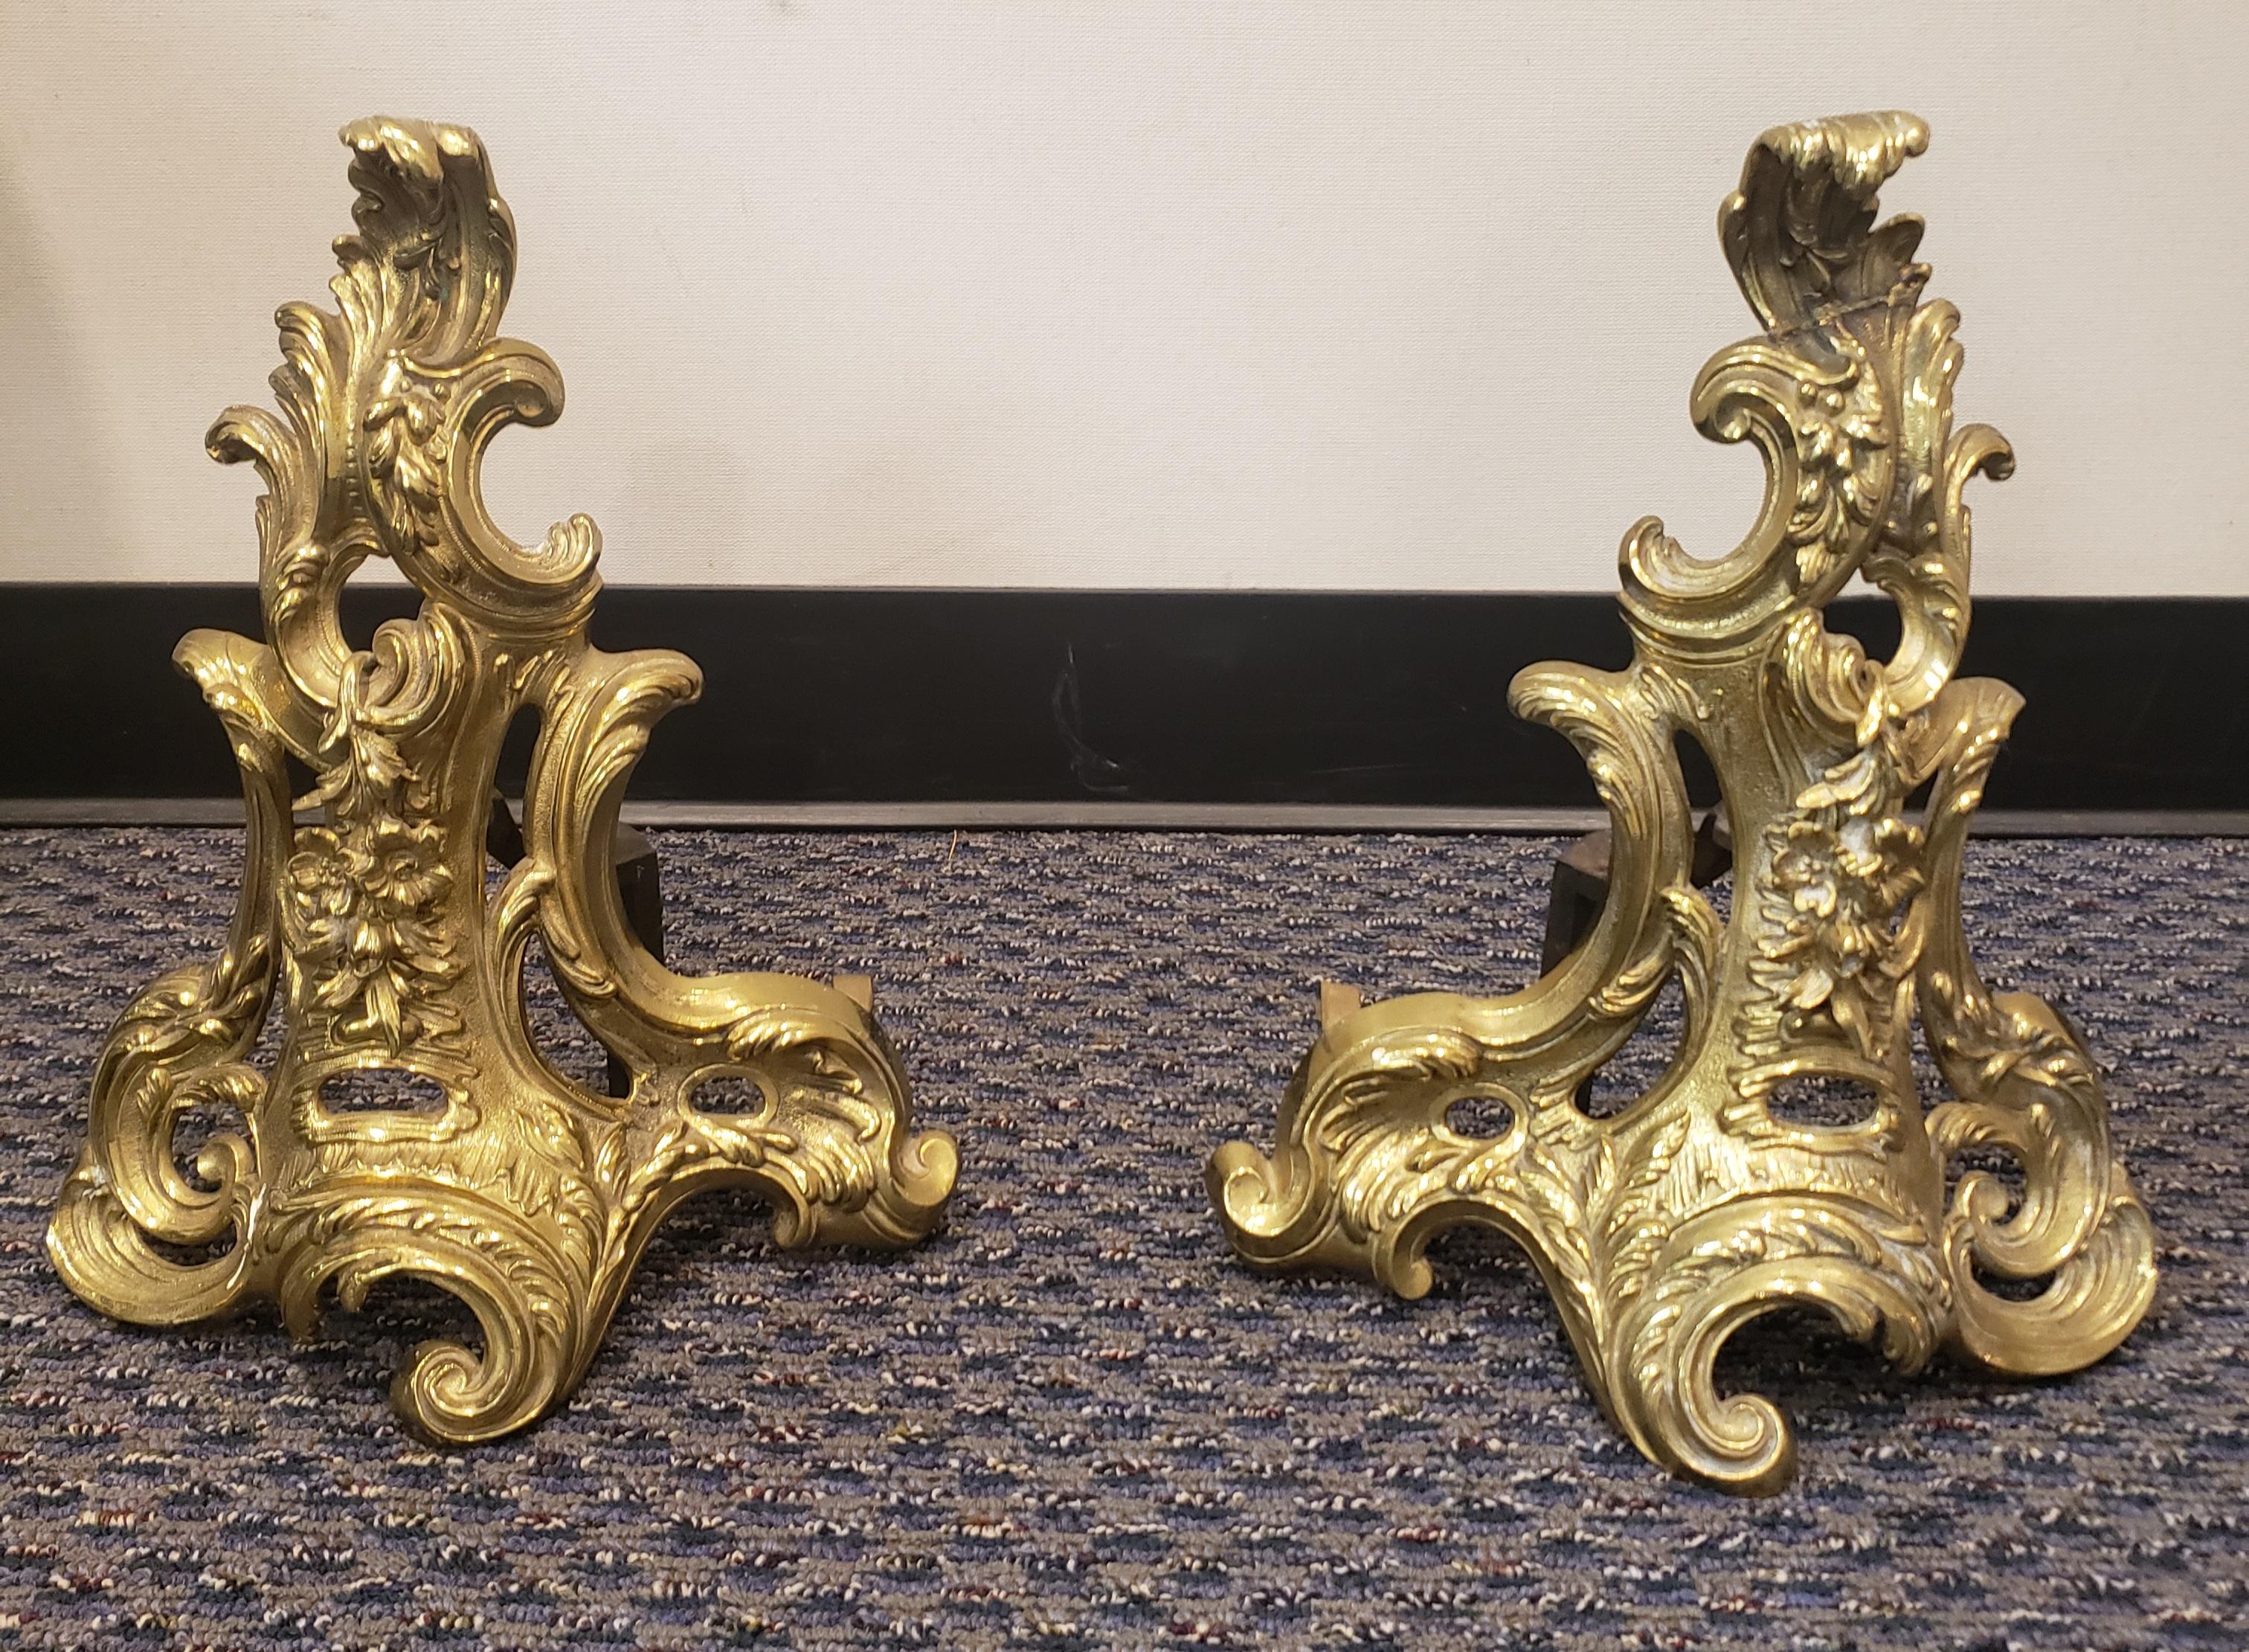 Stunning Pair of French Louis XV Style Ormolu Chenets, Each finely modeled in the form of acanthus leaf sprays.